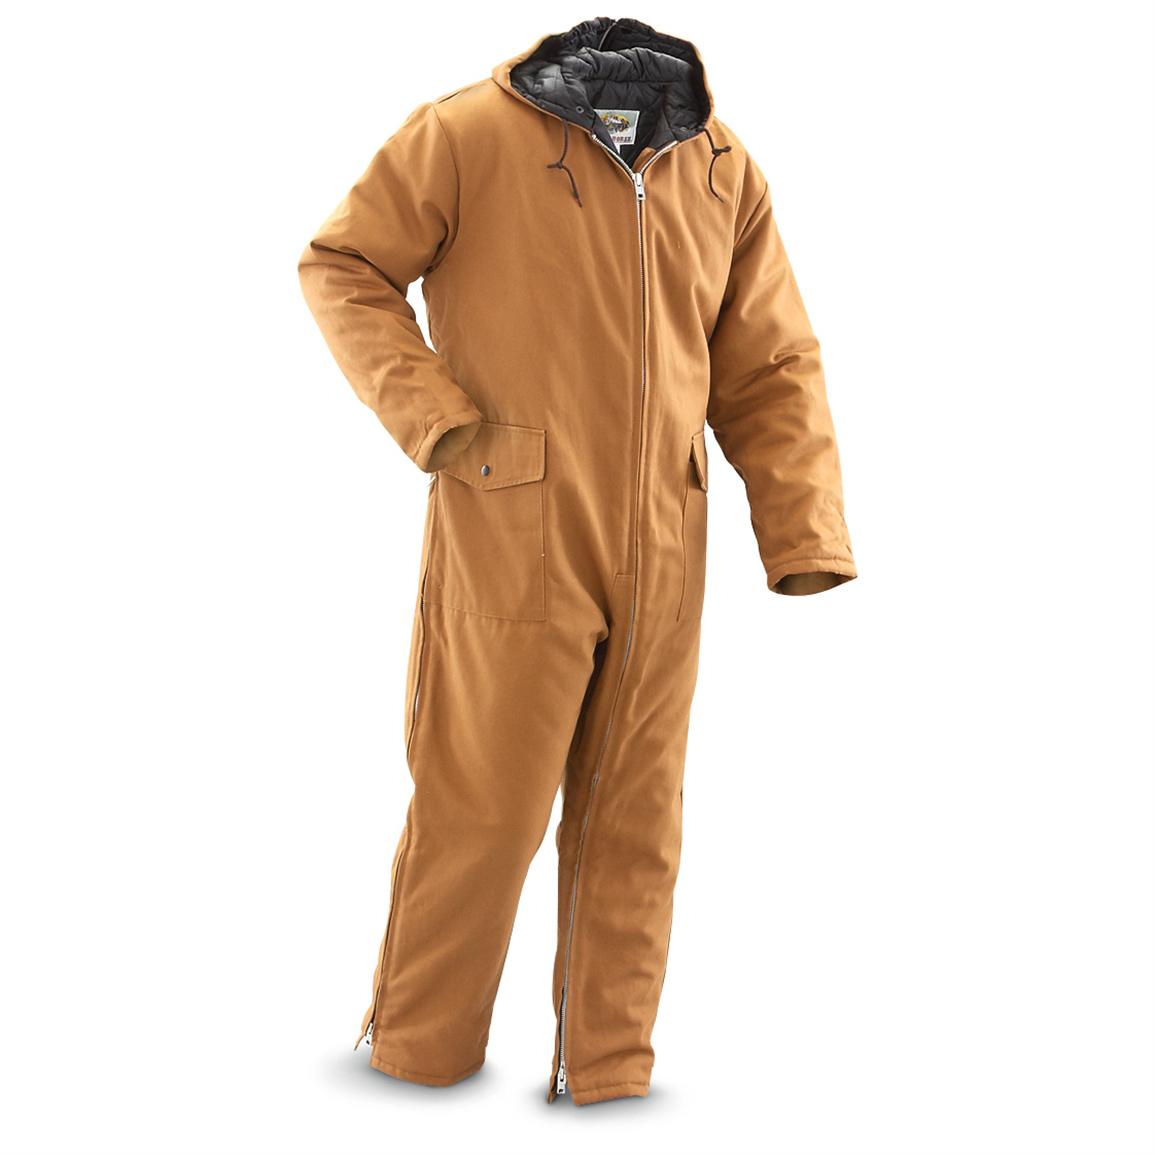 Workhorse Insulated Coveralls - 425109, Insulated Pants, Overalls ...